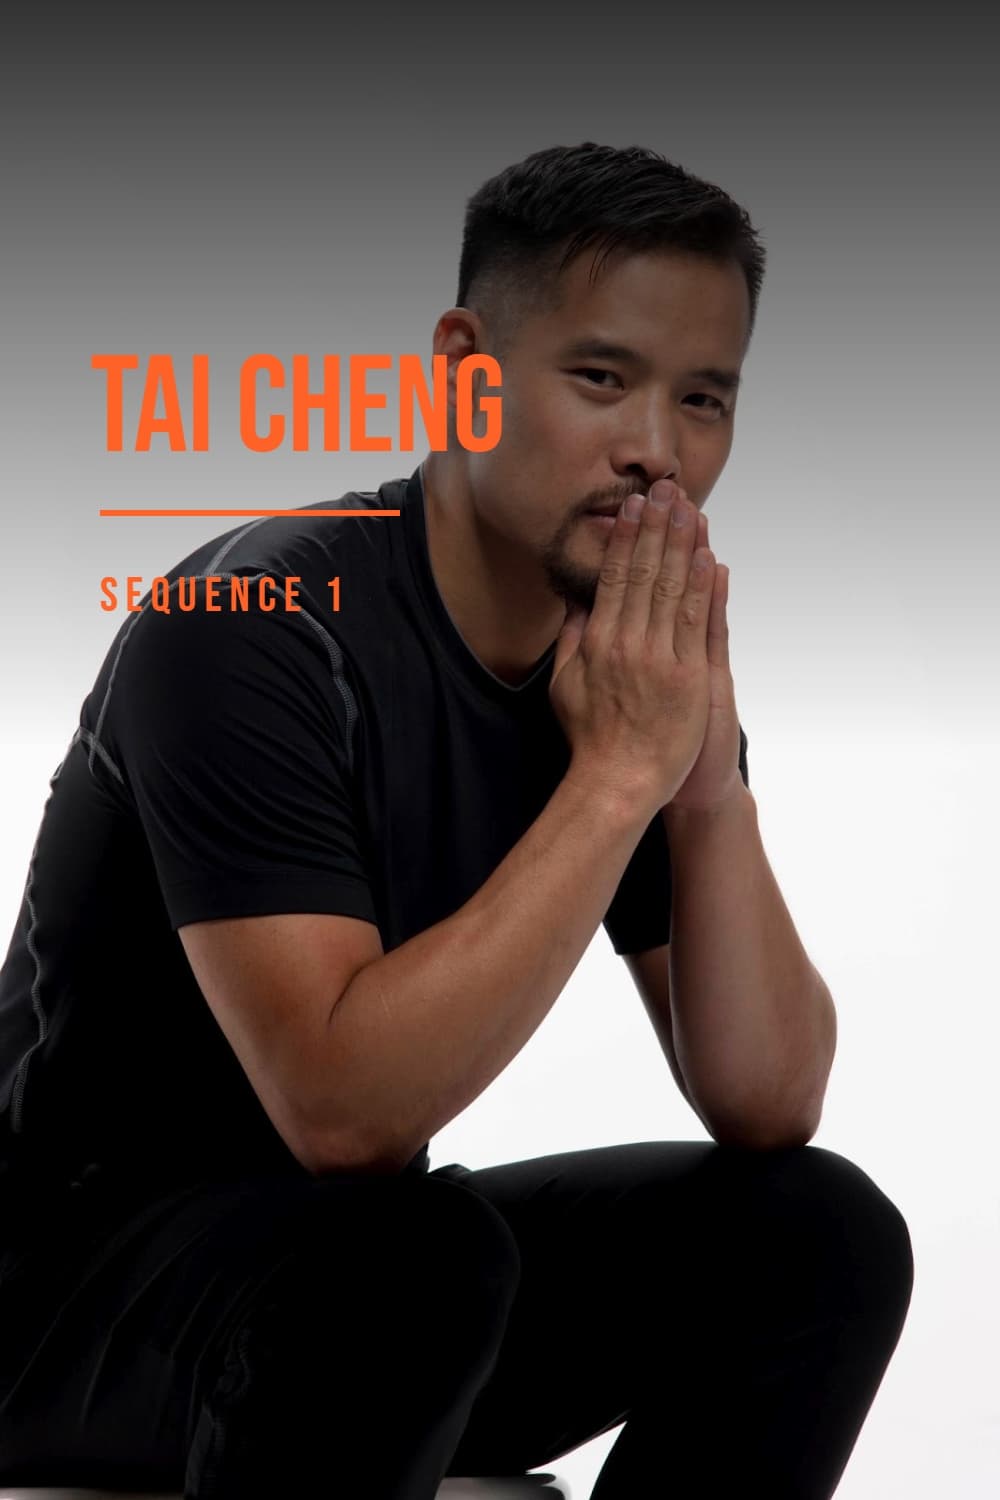 Tai Cheng - Sequence 1